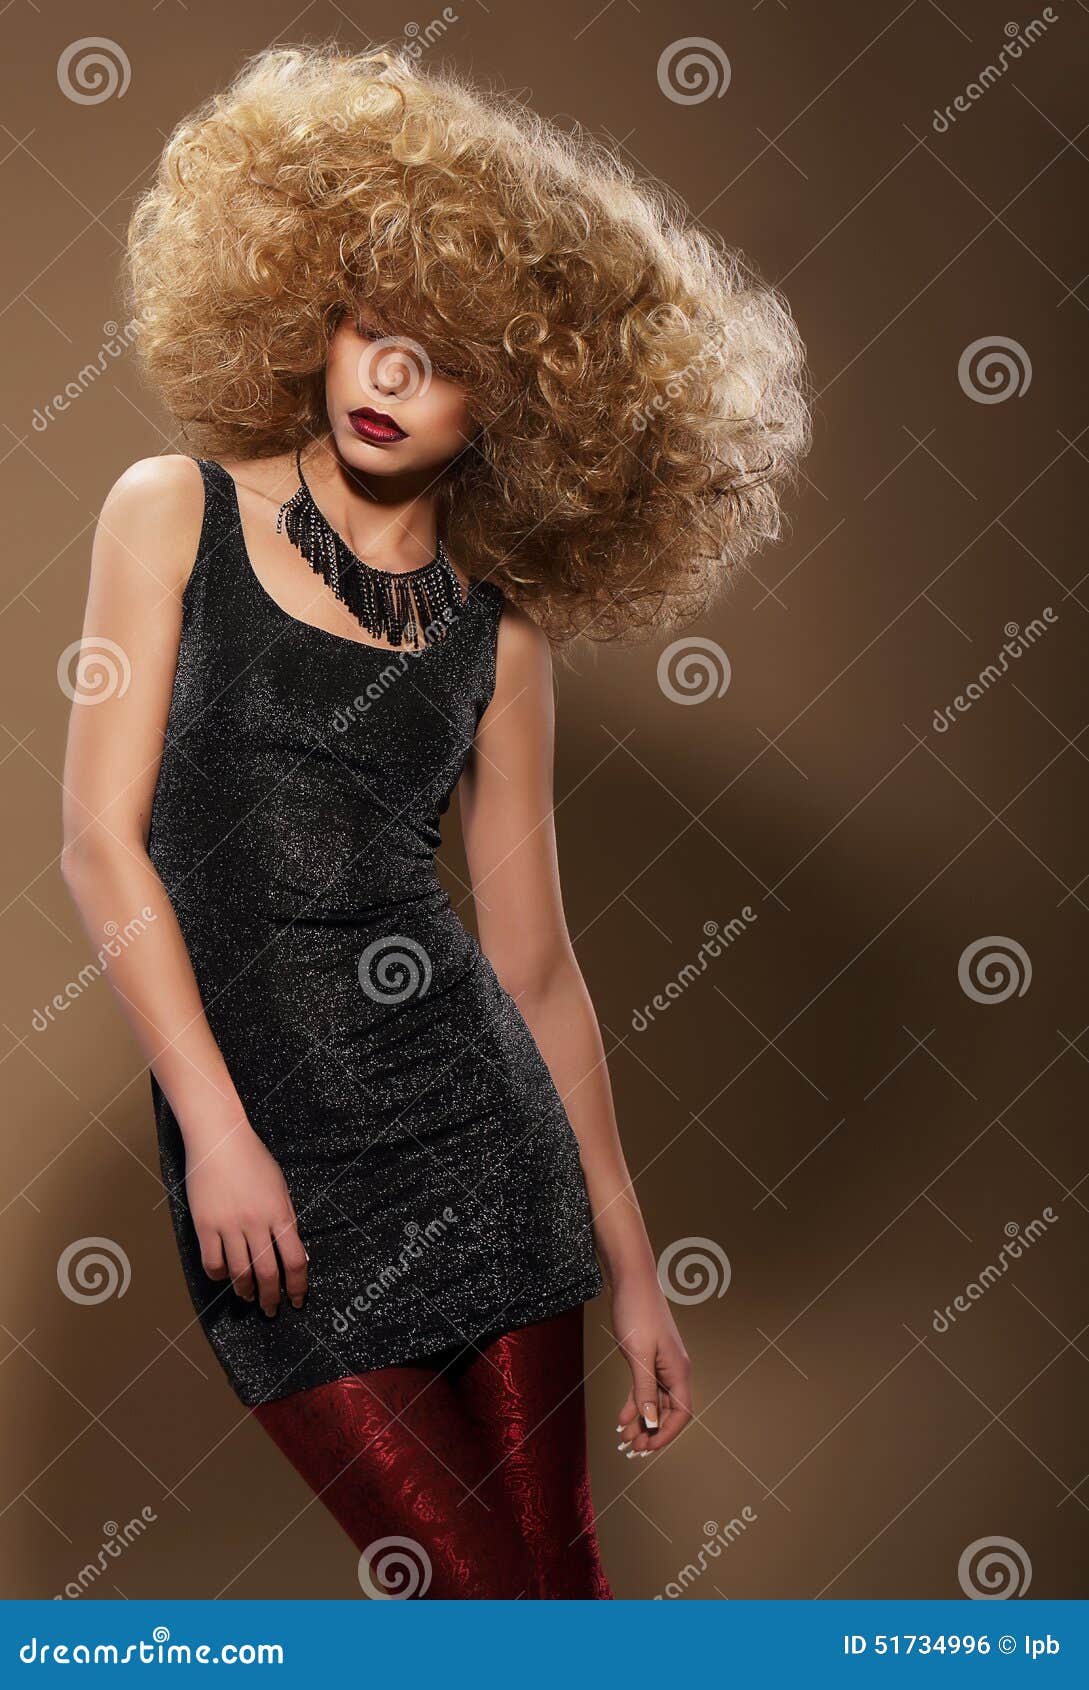 vogue style. stylish woman with extravagant hairstyle